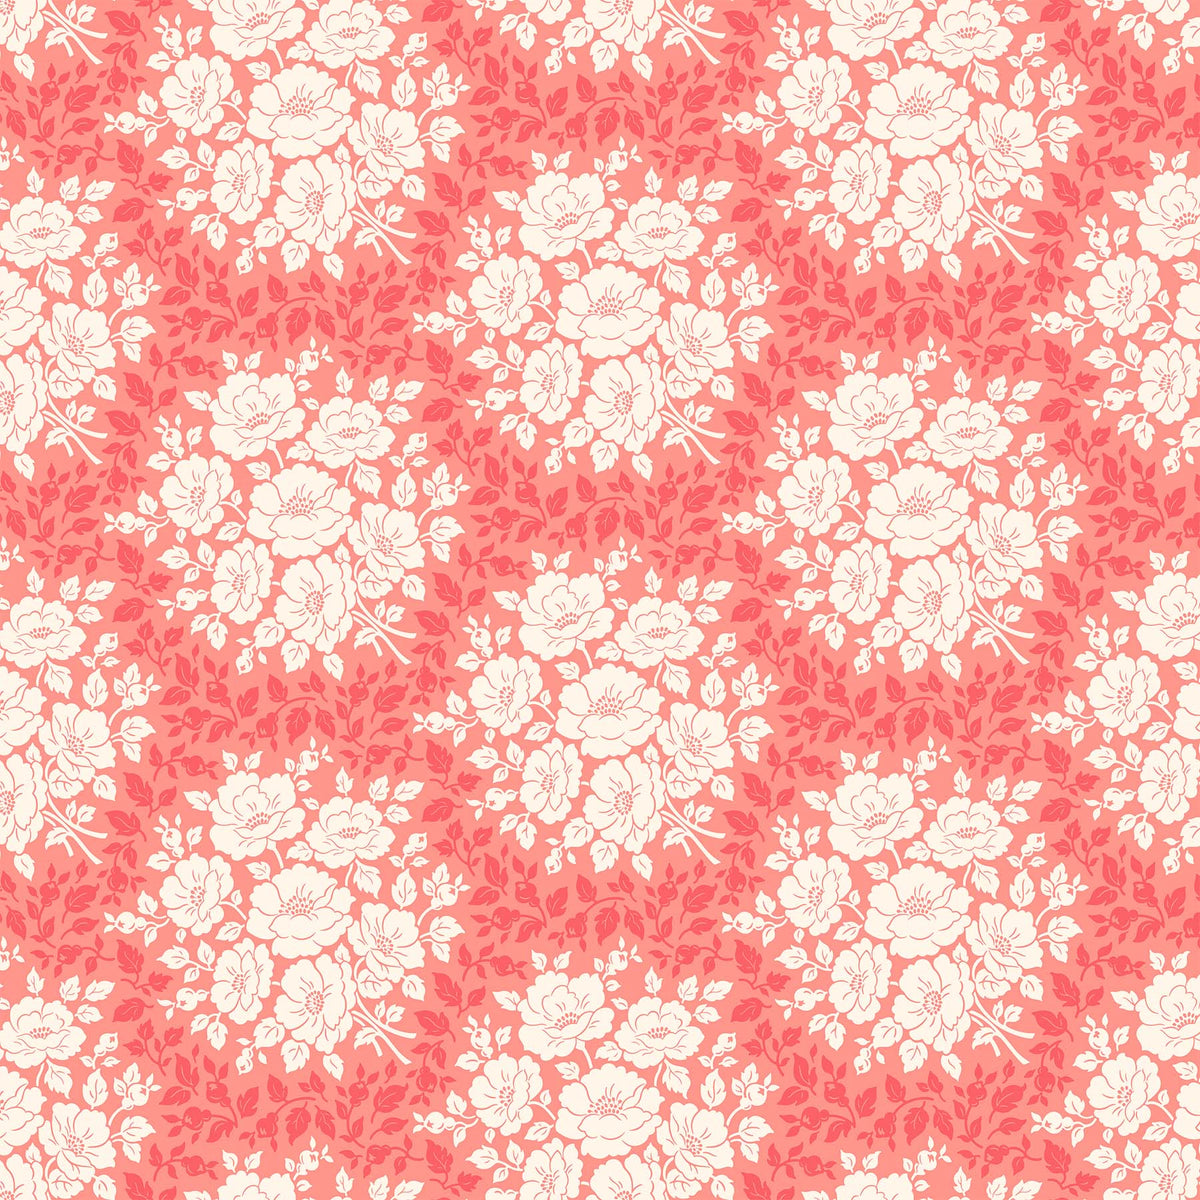 Local Honey Quilt Fabric - Morning Bloom on Coral Pink - 90659-20